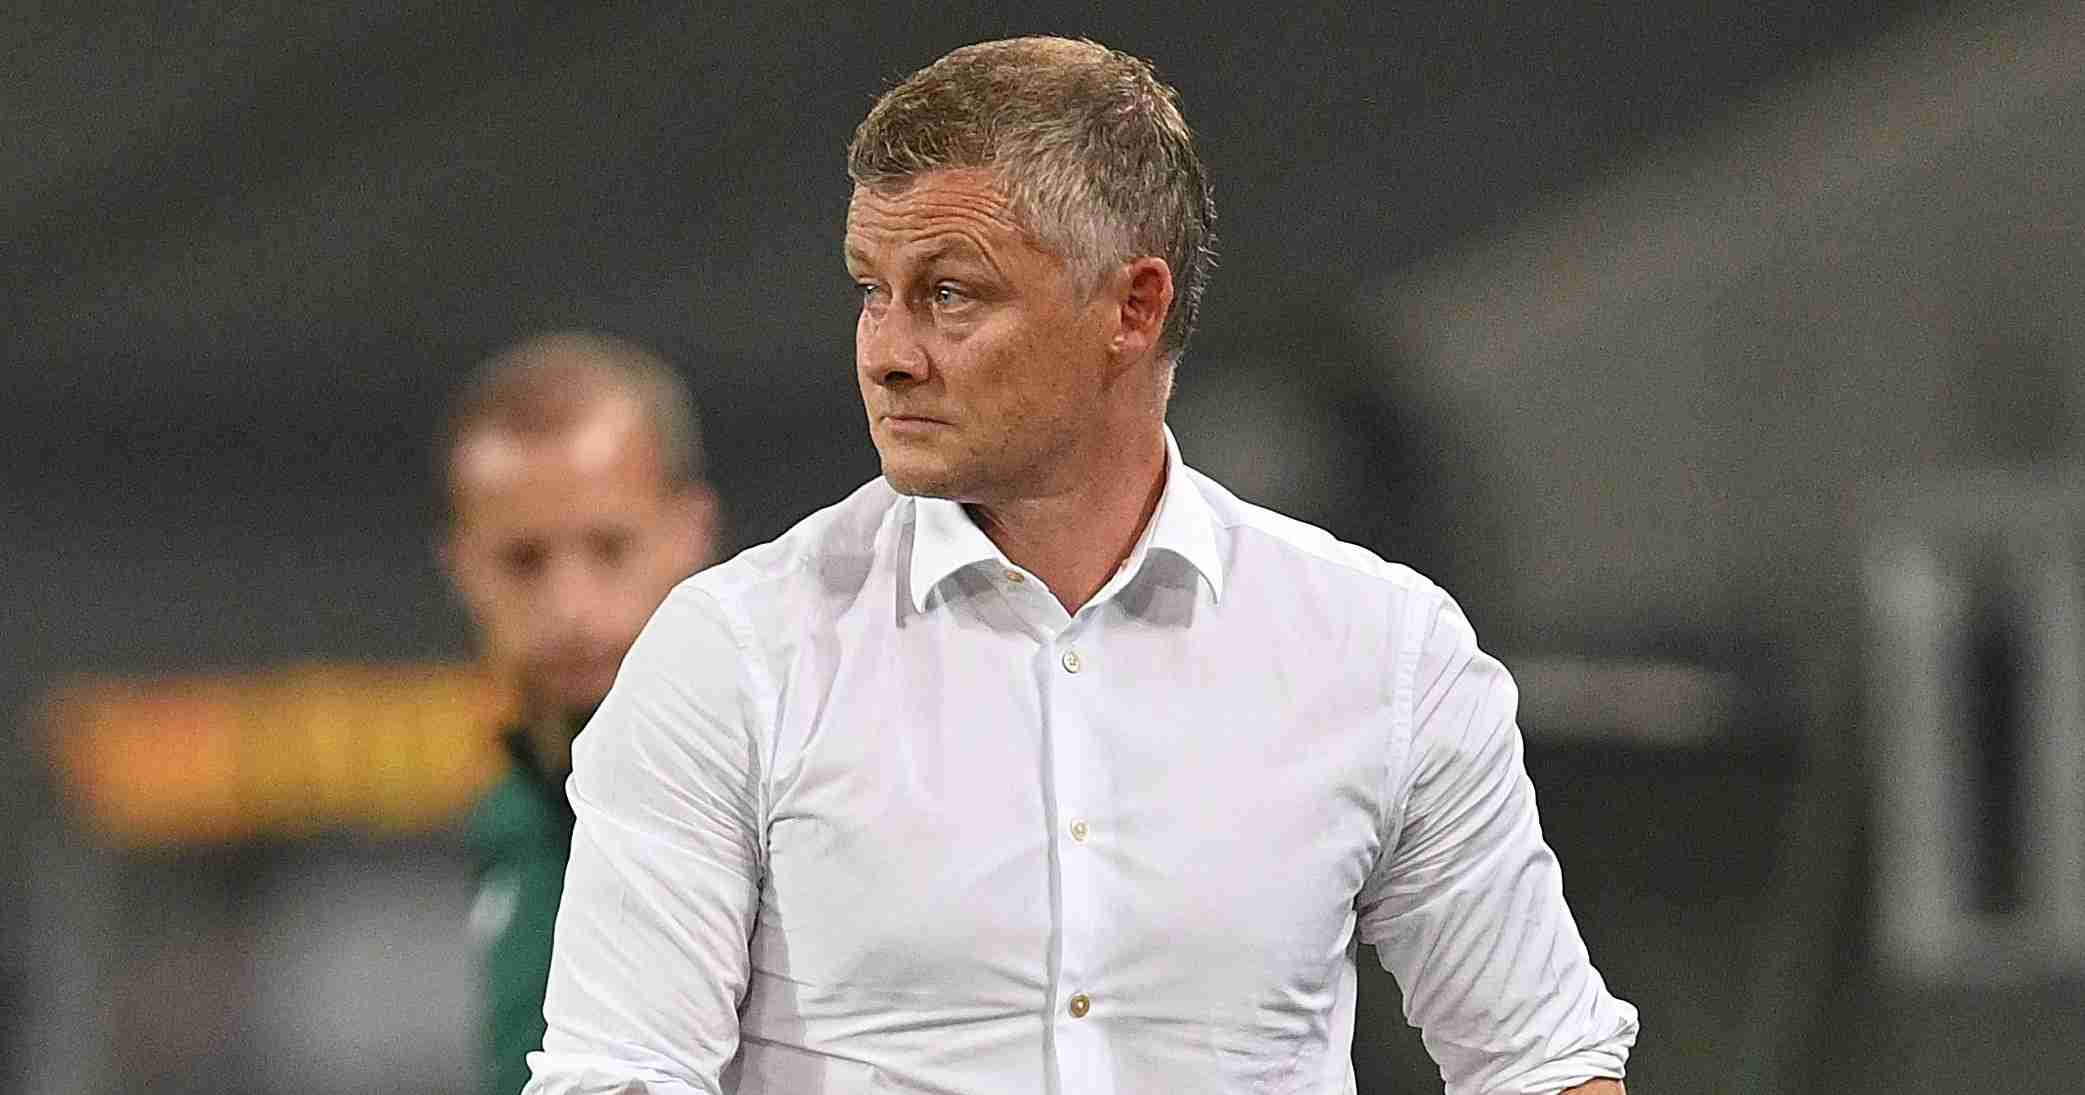 Solskjaer reacts to Barcelona’s embarrassing 8-2 defeat to Bayern Munich